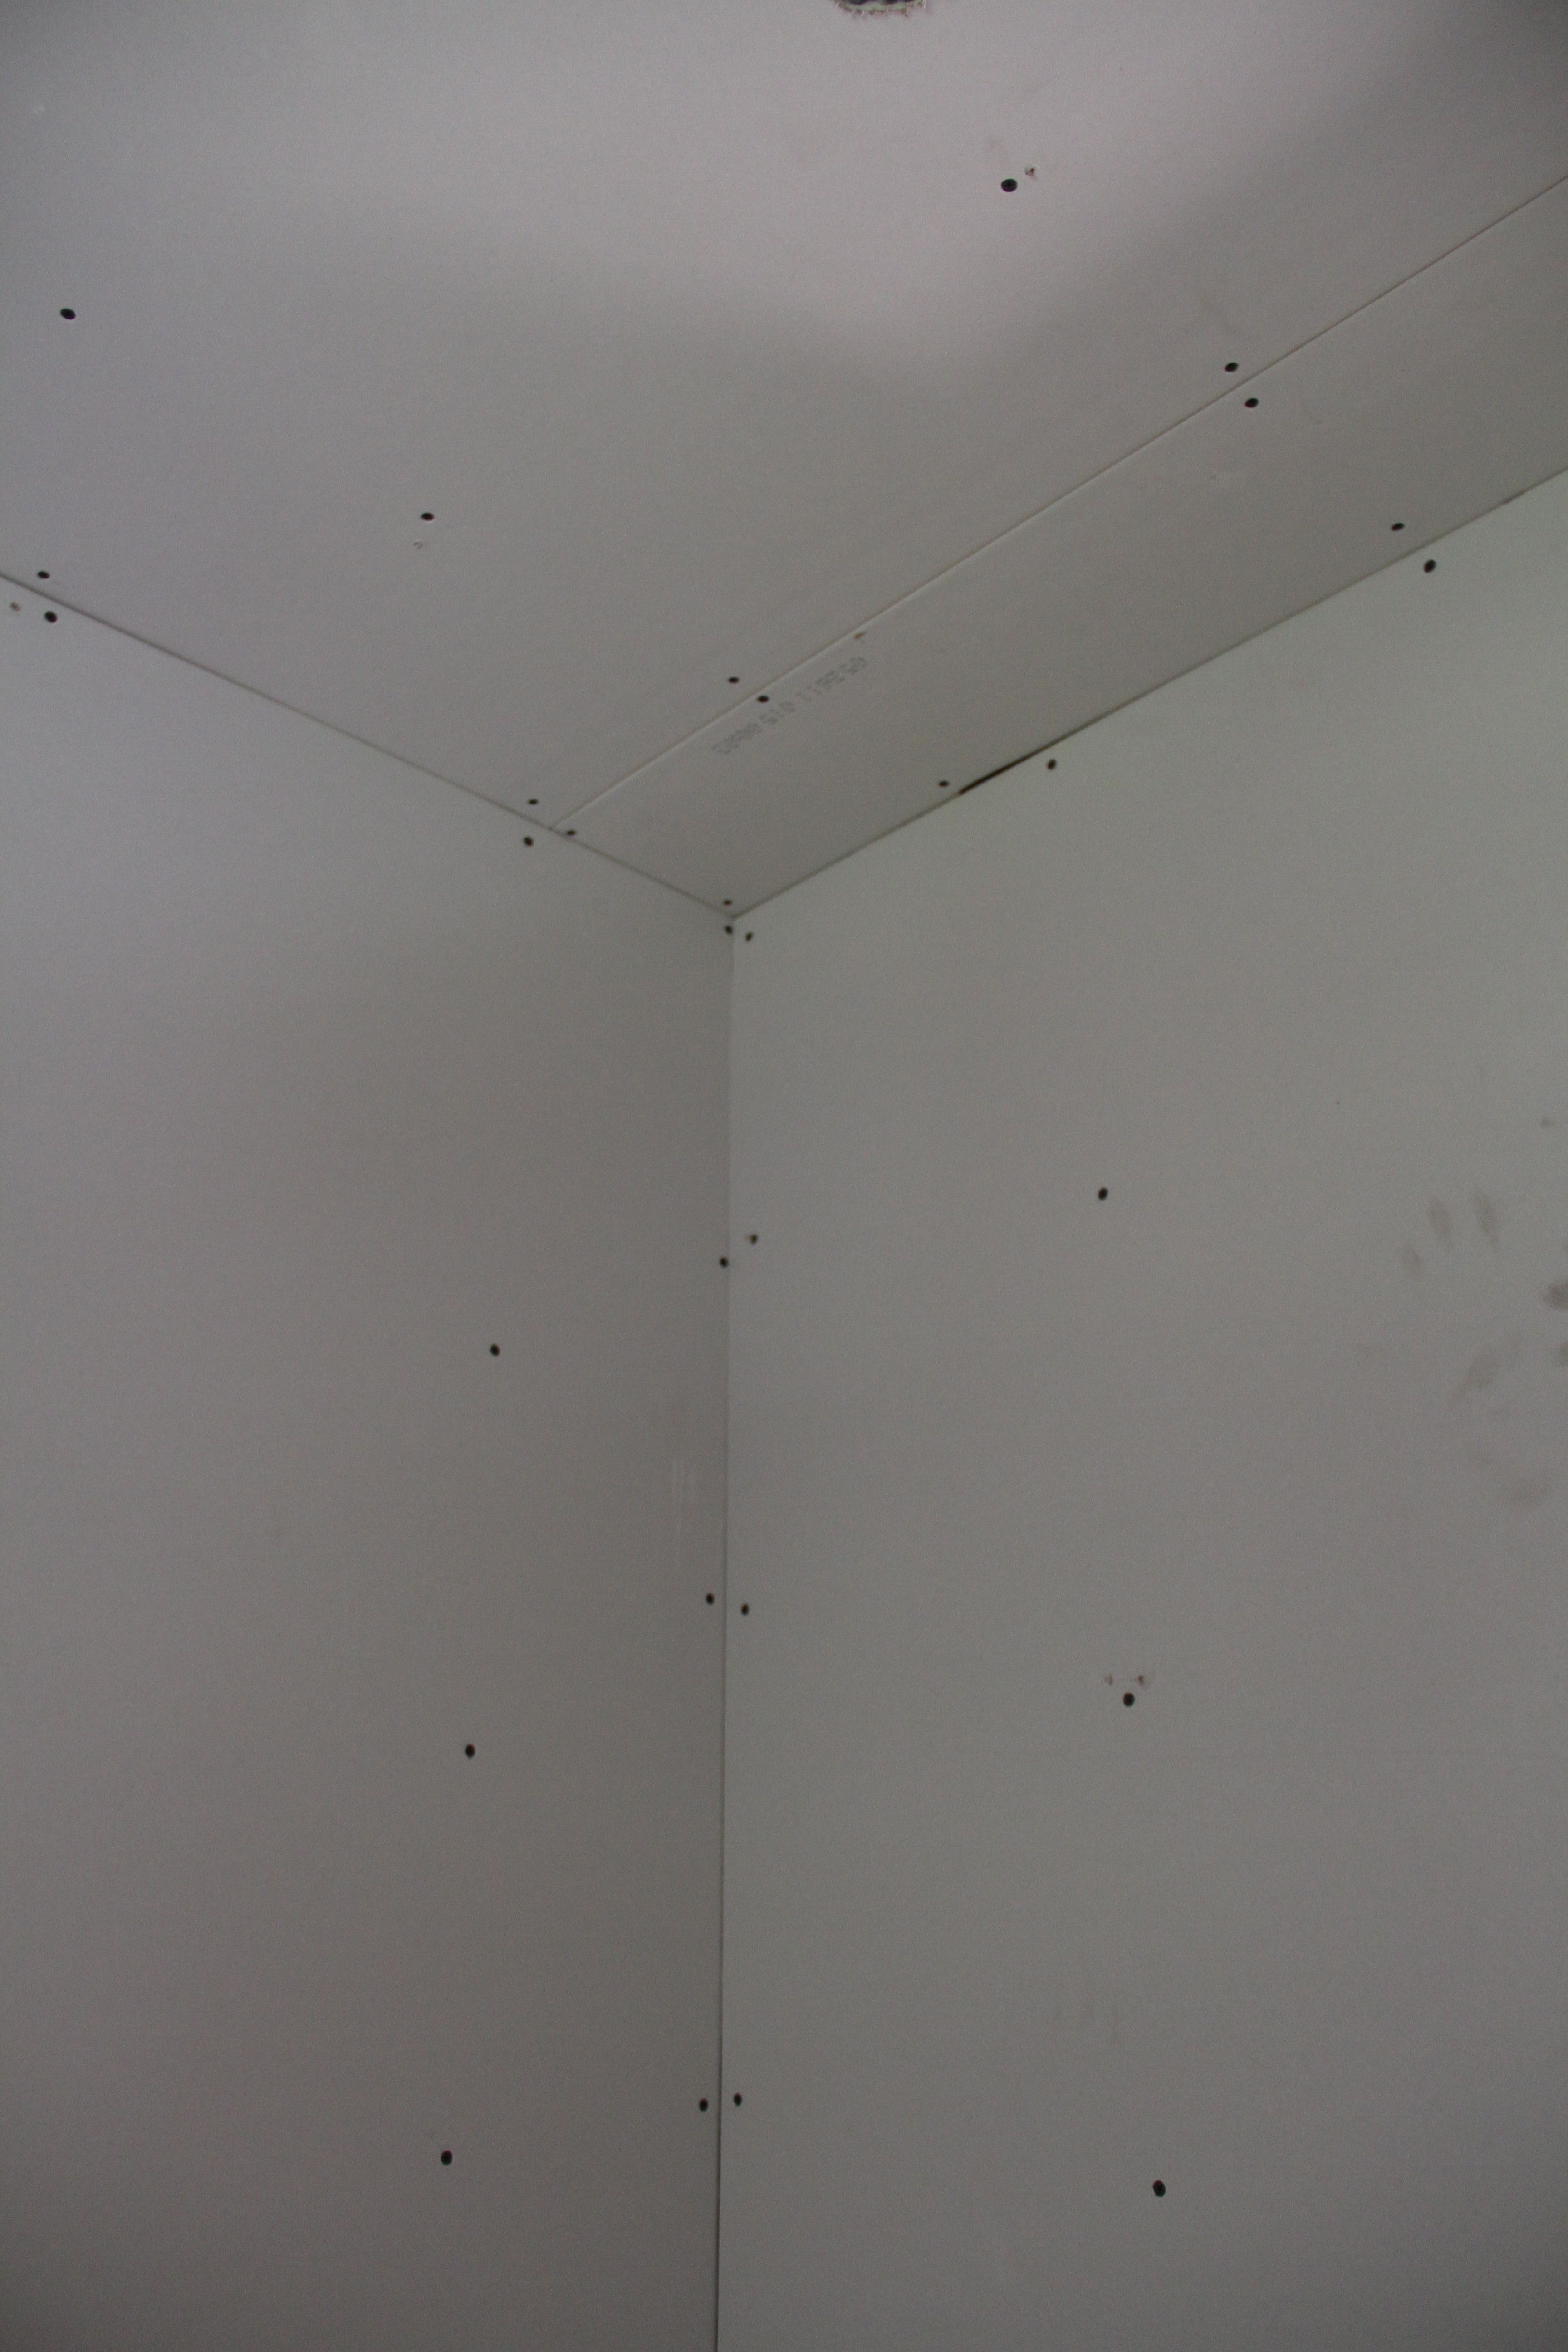 A bit of an optical illusion. But mainly it's just a shot of the tremendous amount of screws needed in proper drywall installation. All of those had to be covered with mud and sanded.